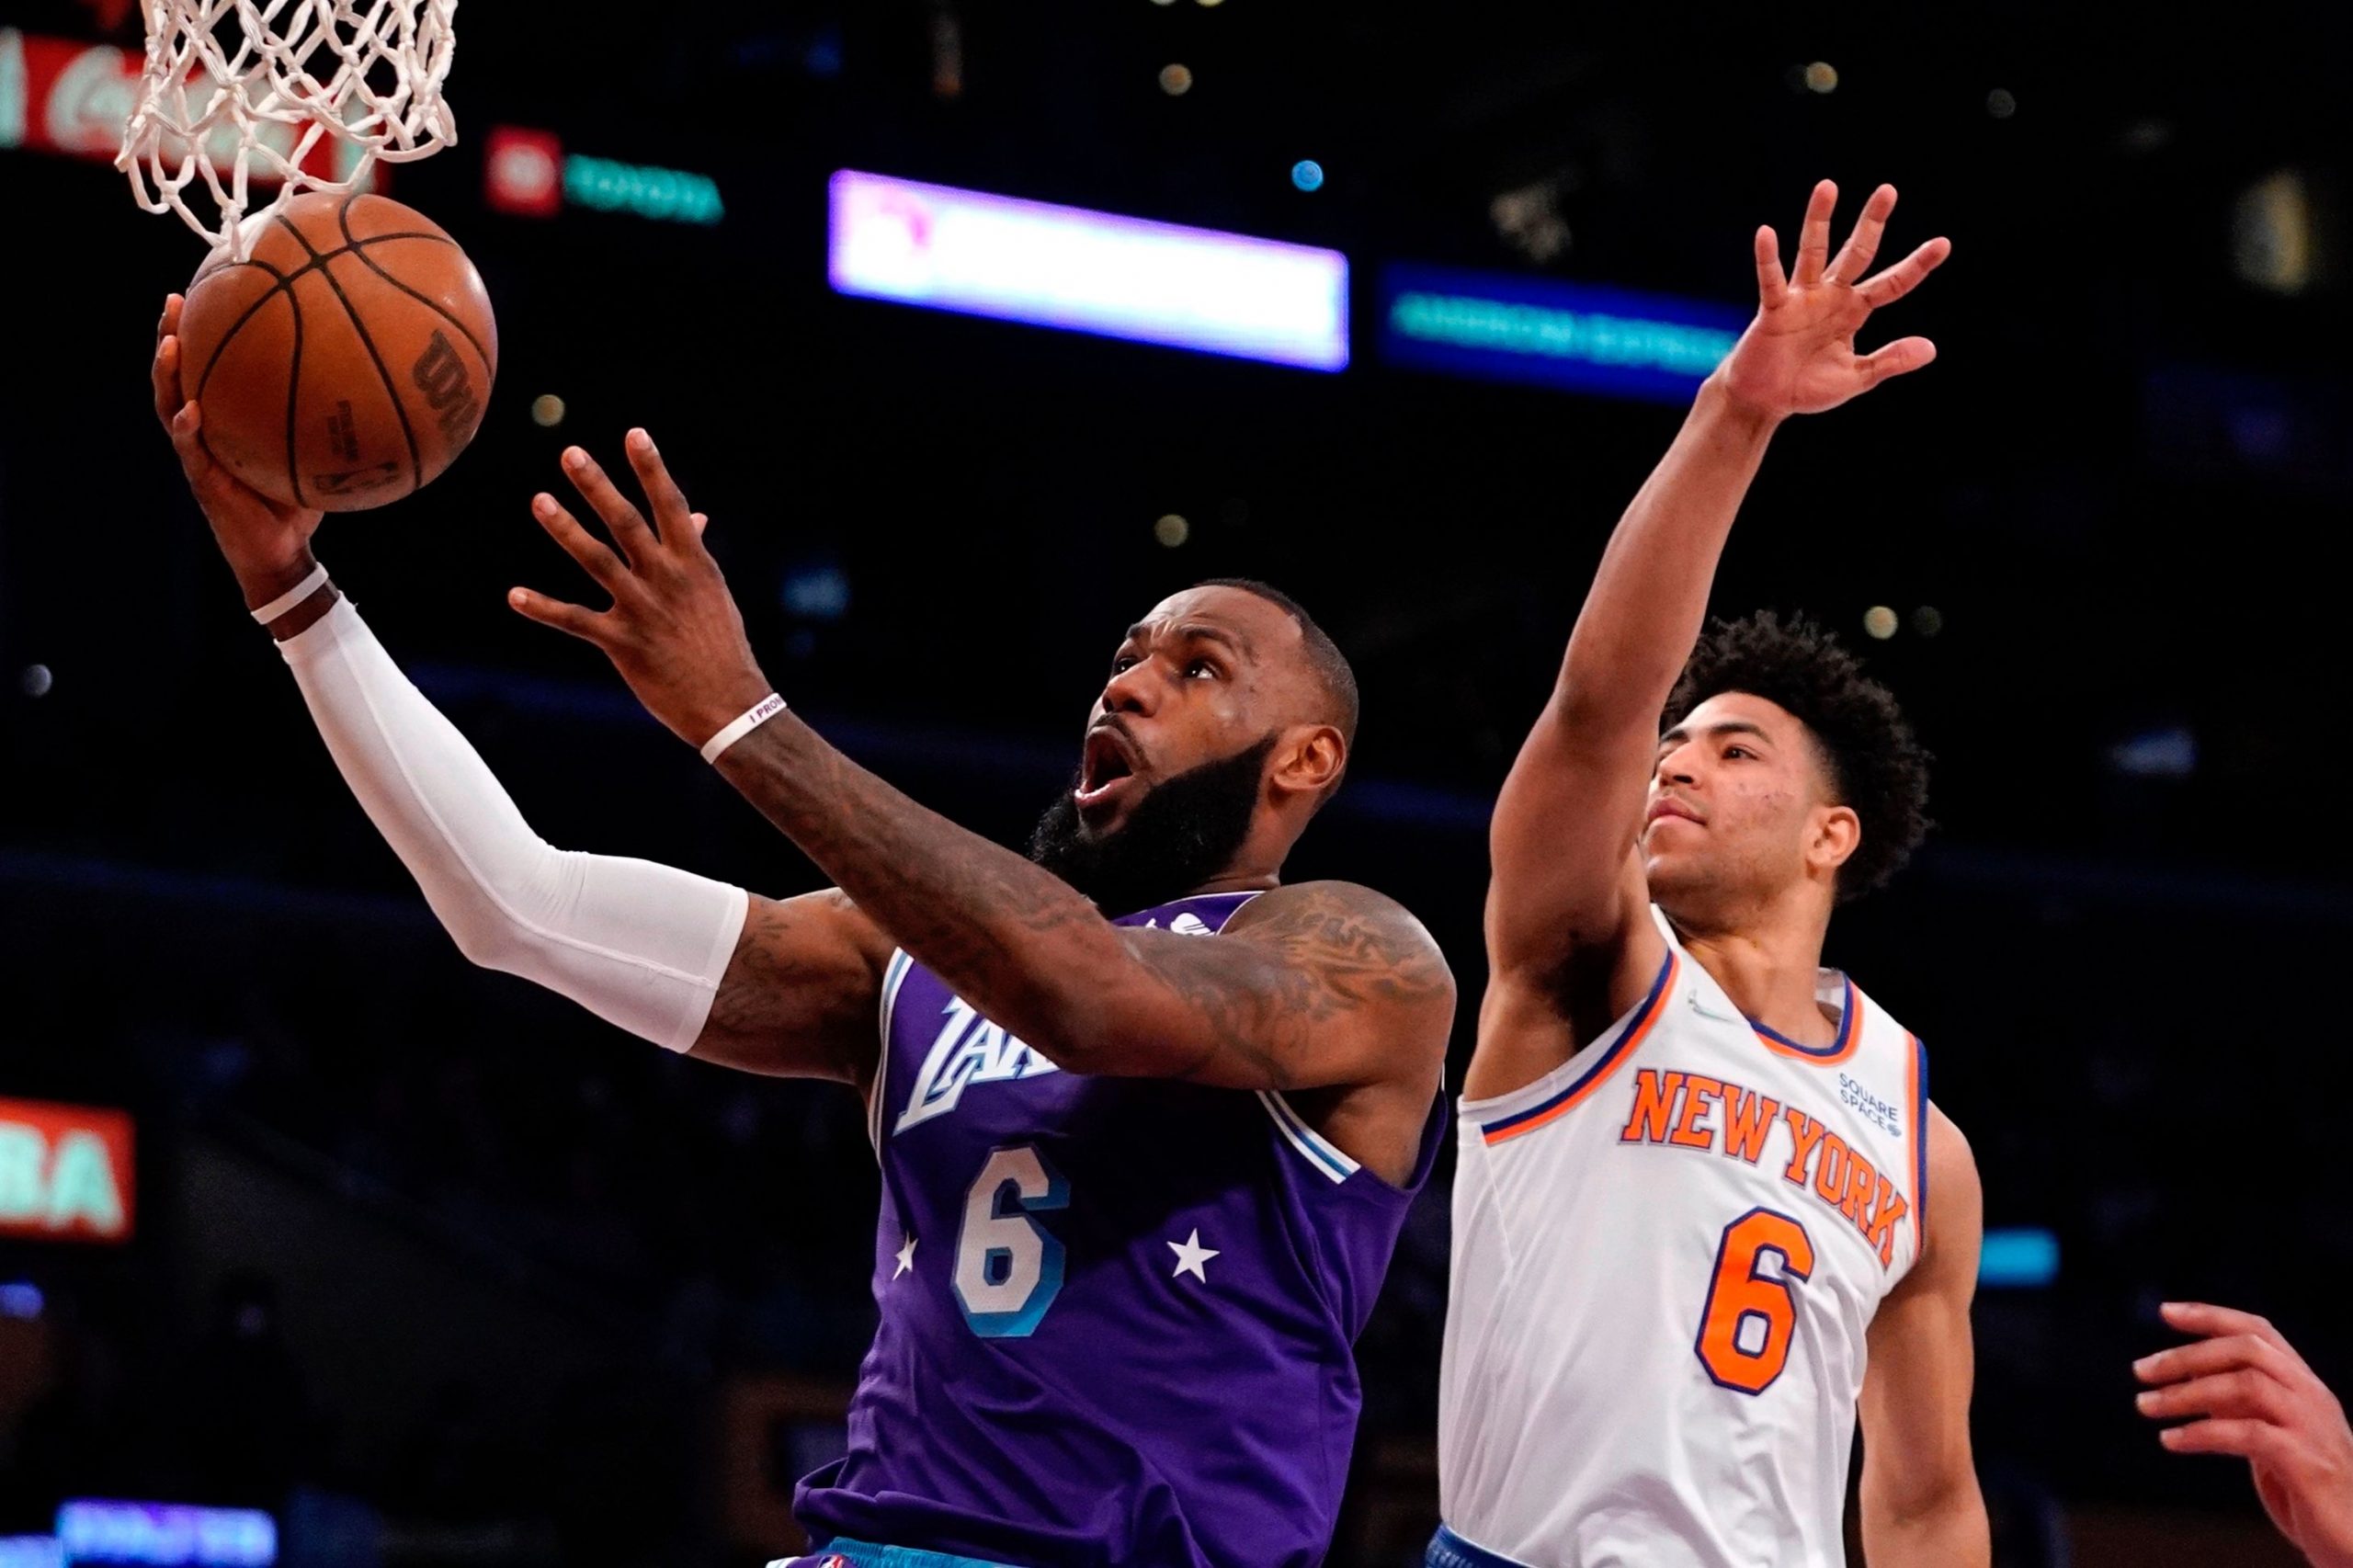 NBA: LeBron James returns with triple-double, Los Angeles Lakers beat New York Knicks in OT